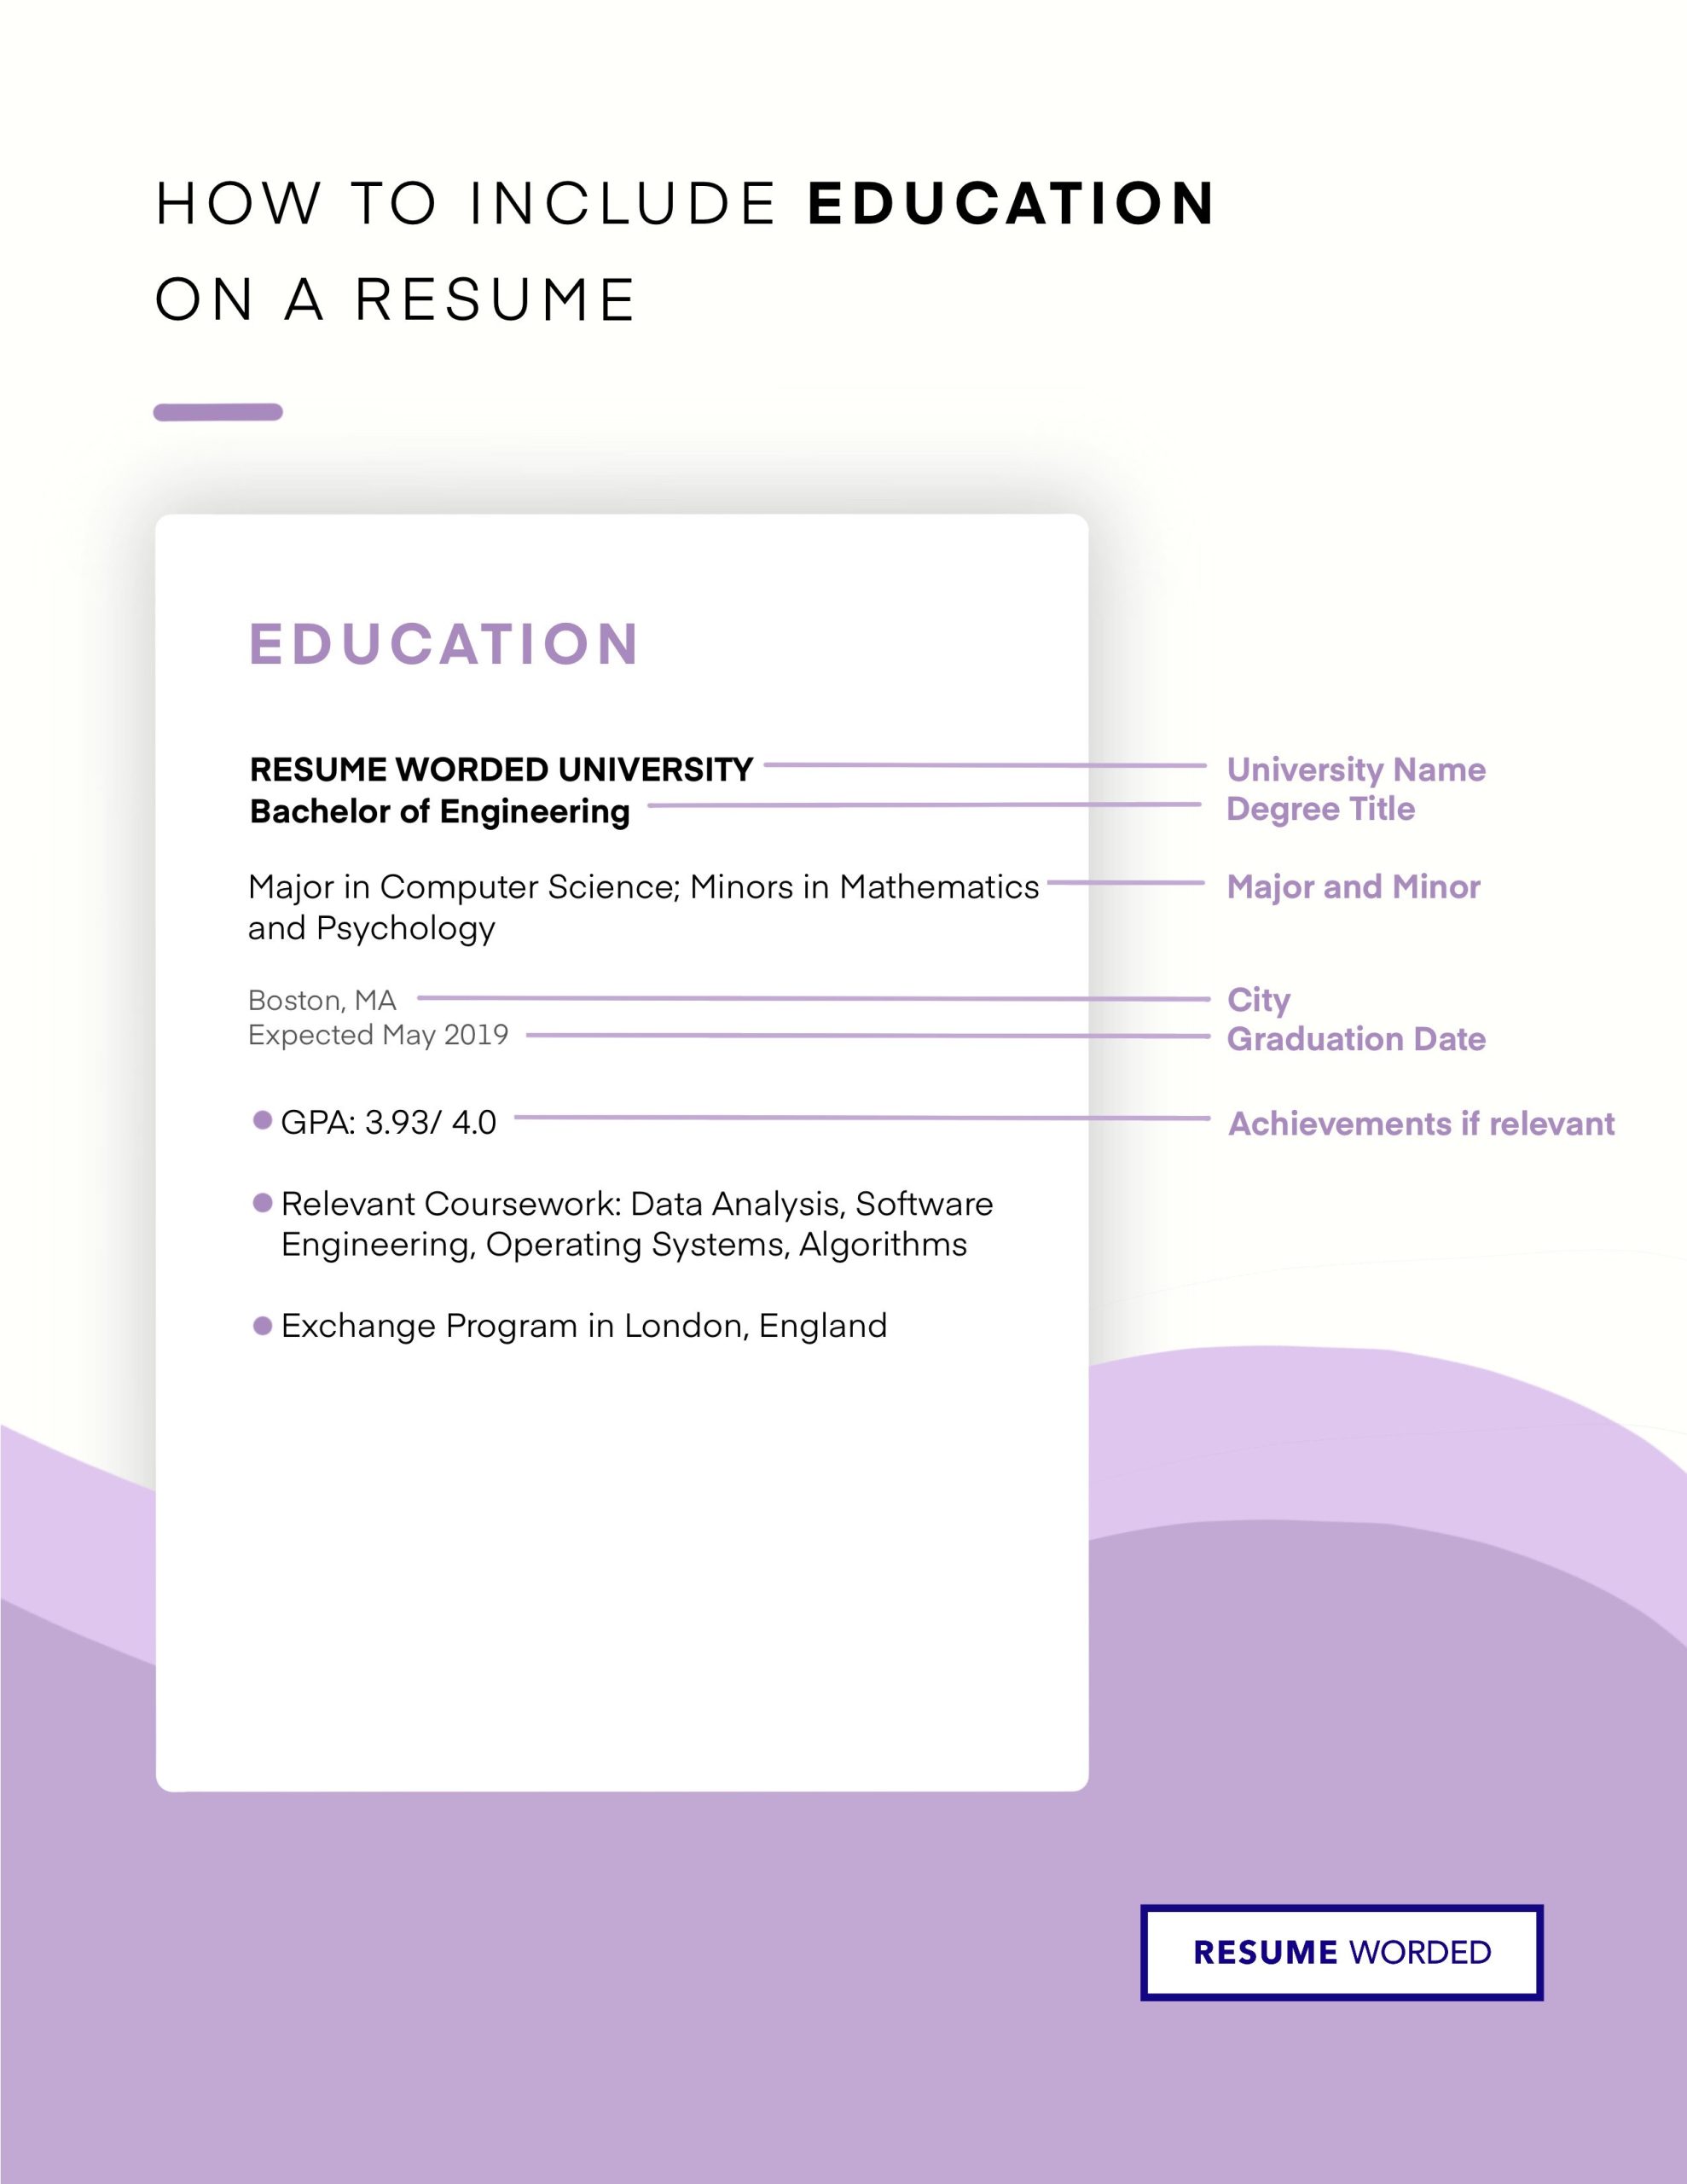 Resume Sample for Education On Resume and Still Continuing the Must-haves when Writing Your Education On Your Resume [for 2022]